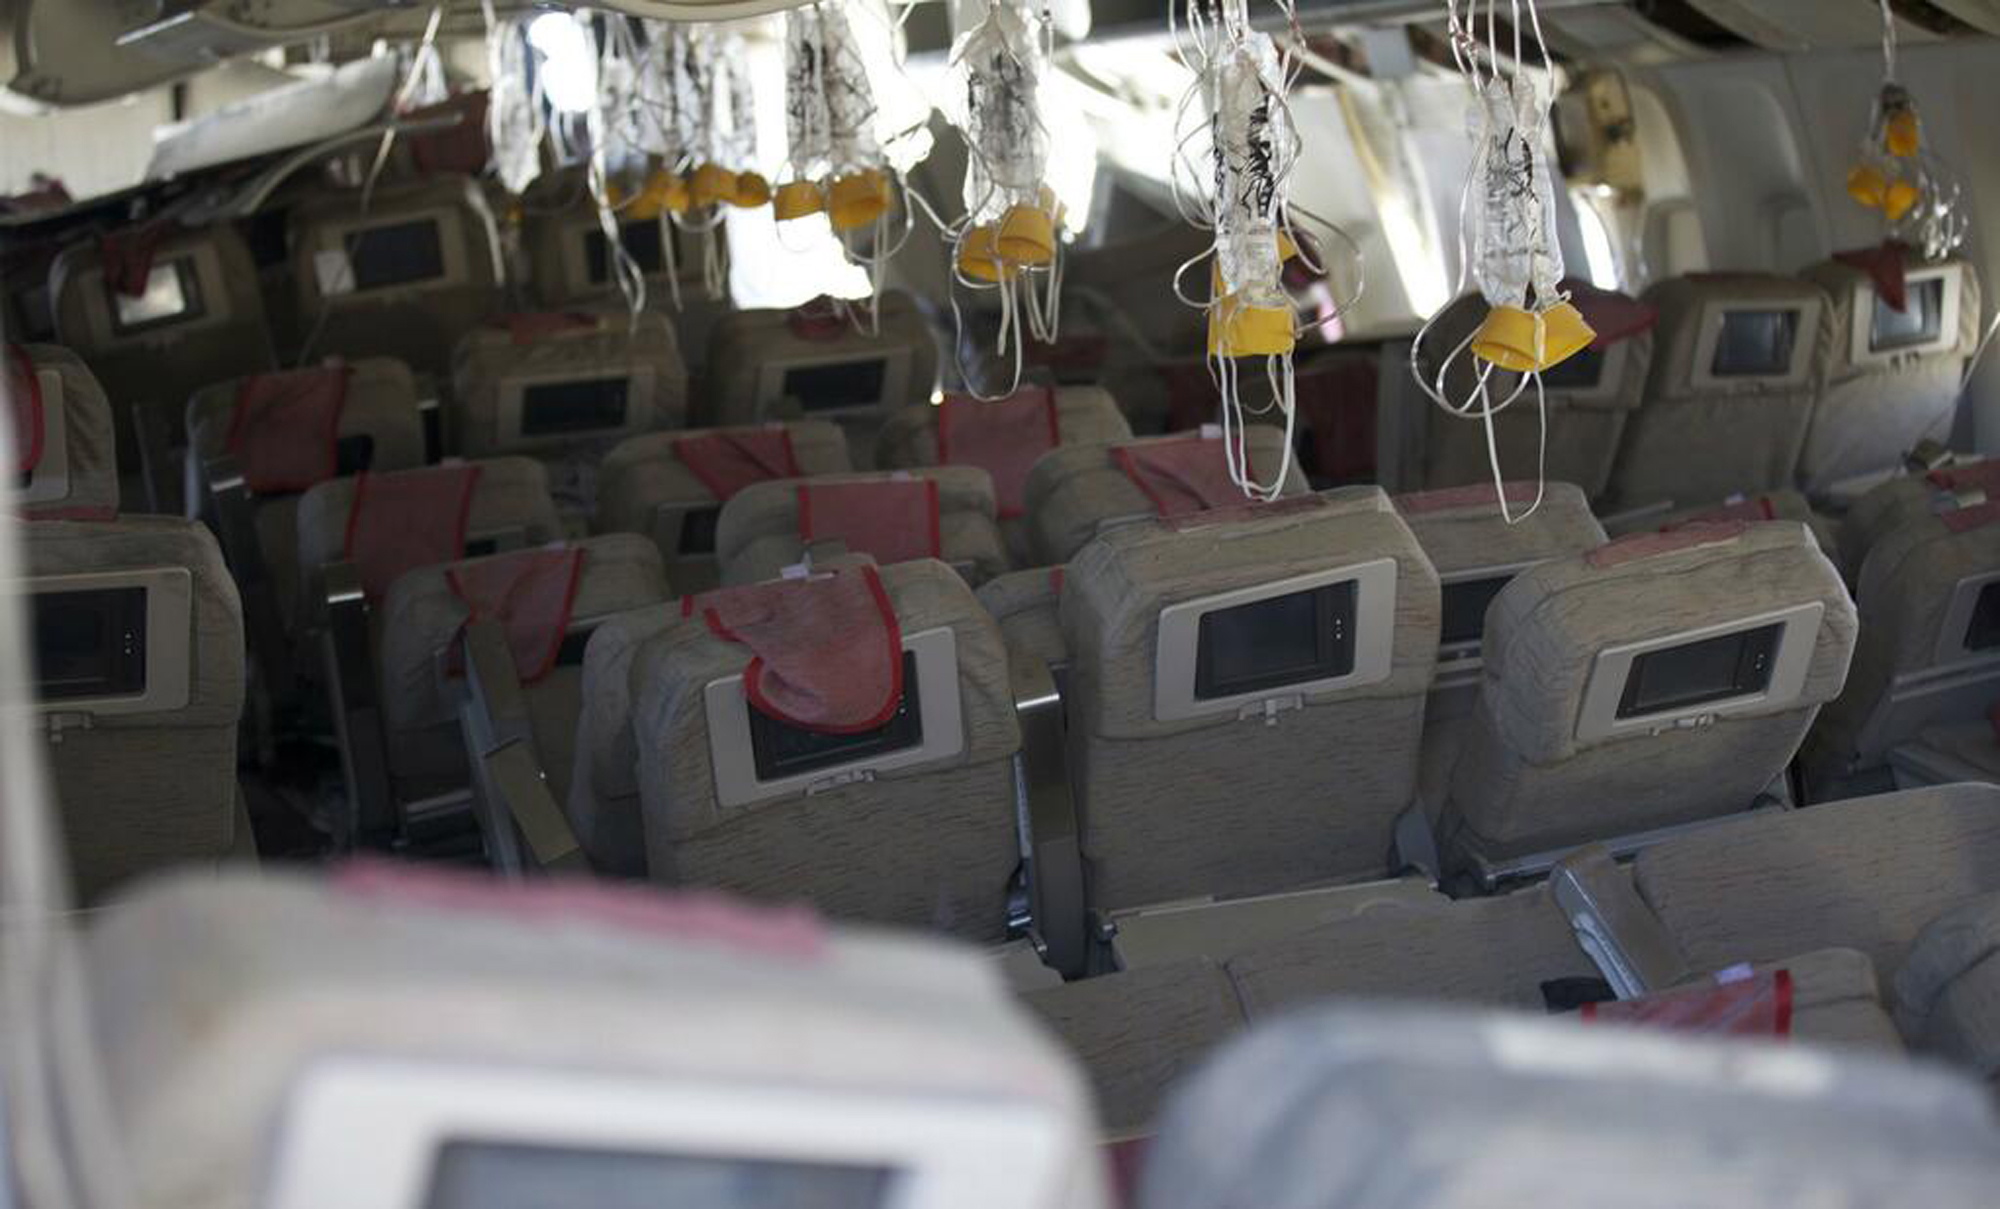 National Transportation Safety Board
The interior of the Boeing 777 Asiana Airlines Flight 214 aircraft is seen Sunday, a day after the flight crashed upon landing at San Francisco International Airport.